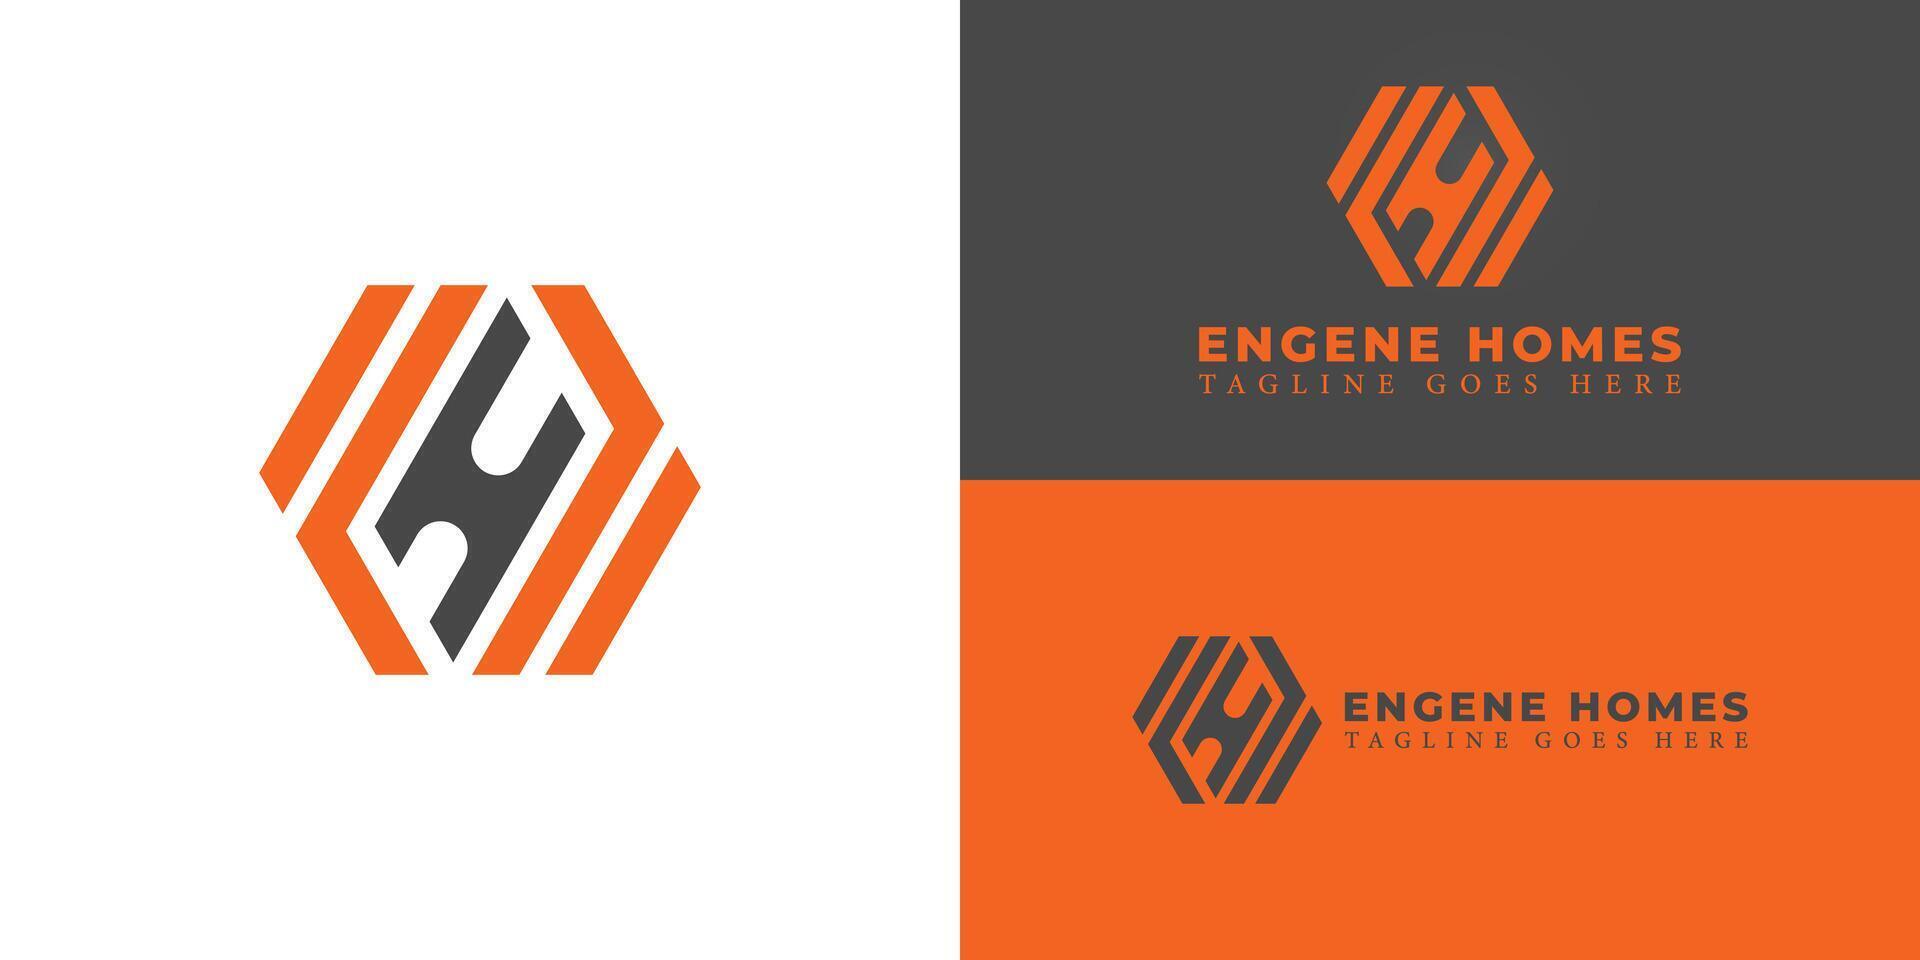 Abstract initial hexagon letter EH or HE logo in orange-black color isolated on multiple background colors. The logo is suitable for home builders' business service logo design inspiration templates. vector